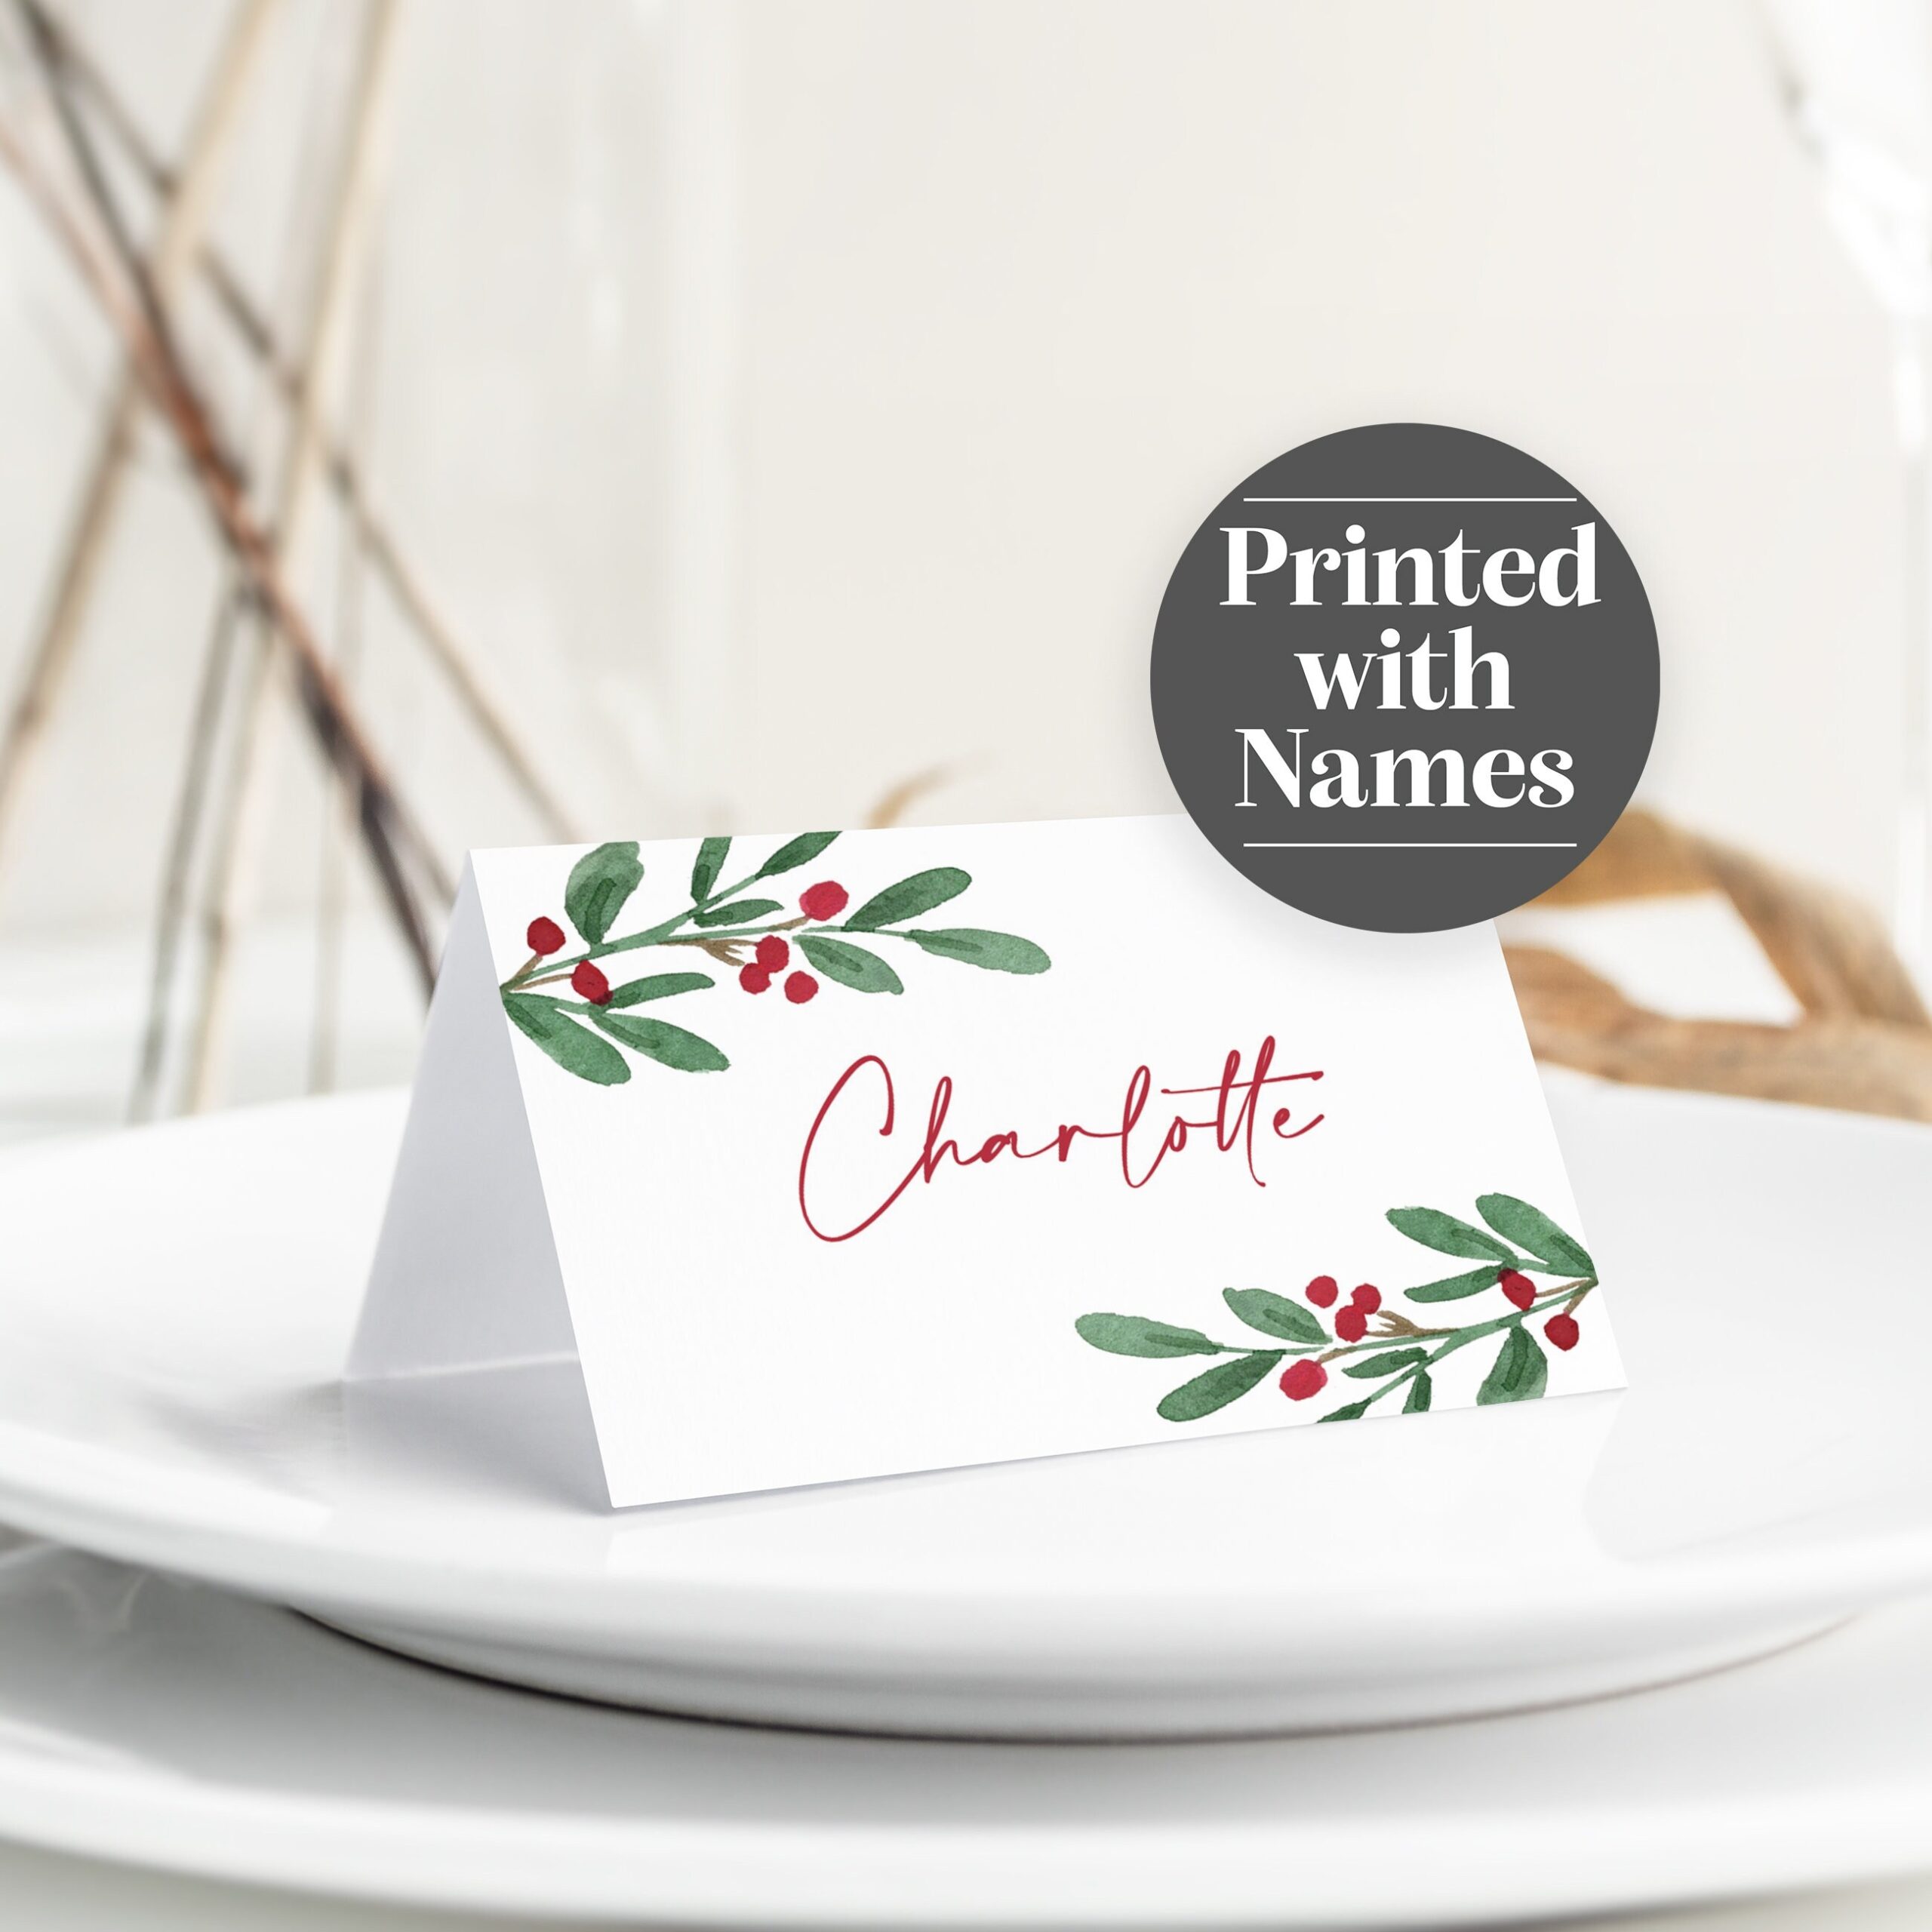 Christmas Place Cards With Names Printed Personalized Custom Place Cards Christmas Table Name Placecards Tented Holiday Party PC124 Etsy - Christmas Table Name Cards Free Printable